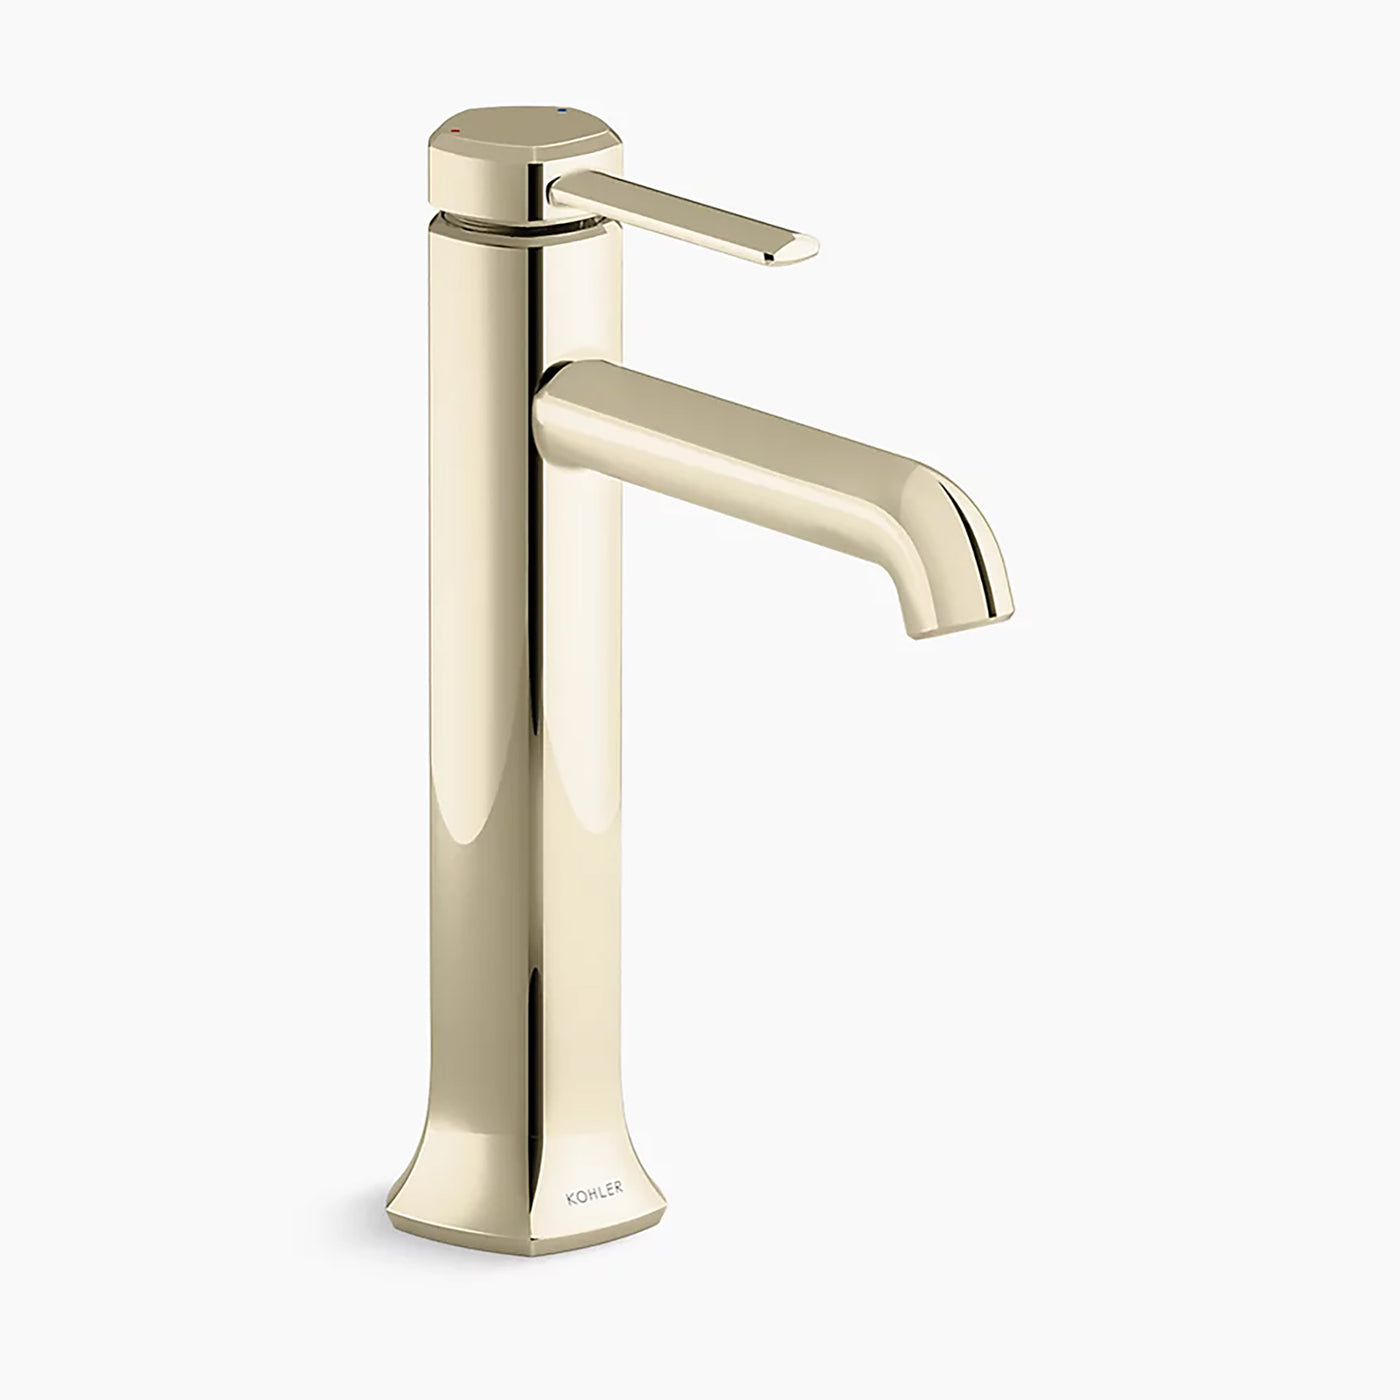 Occasion® Tall Single-Handle Bathroom Sink Faucet